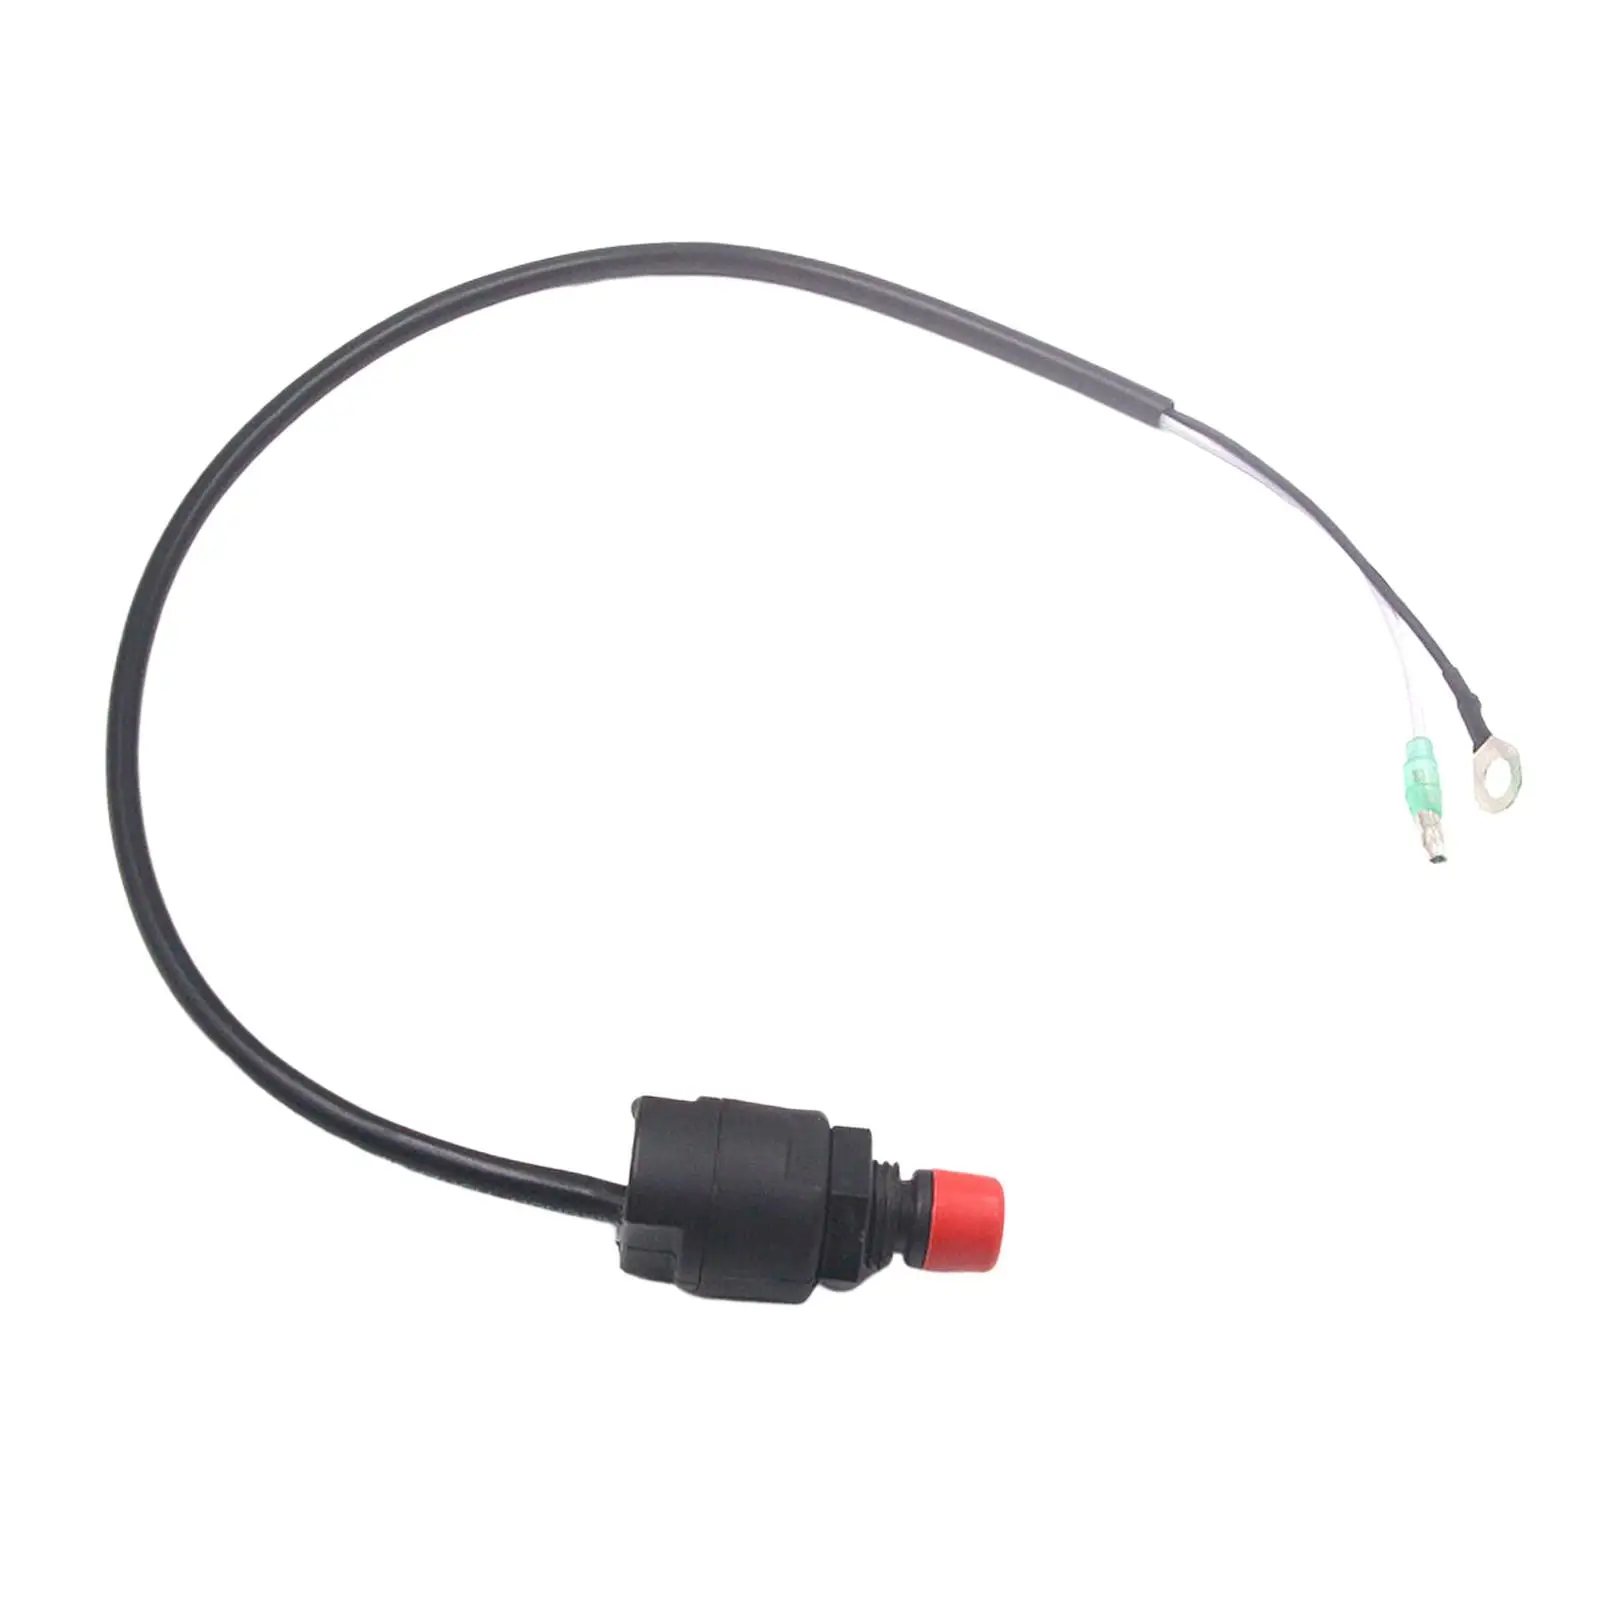 Durable Boat Outboard Kill Stop Switch Engine Motor Emergency Kill Stop Switch for Boat Dirt Bike Accessories Parts